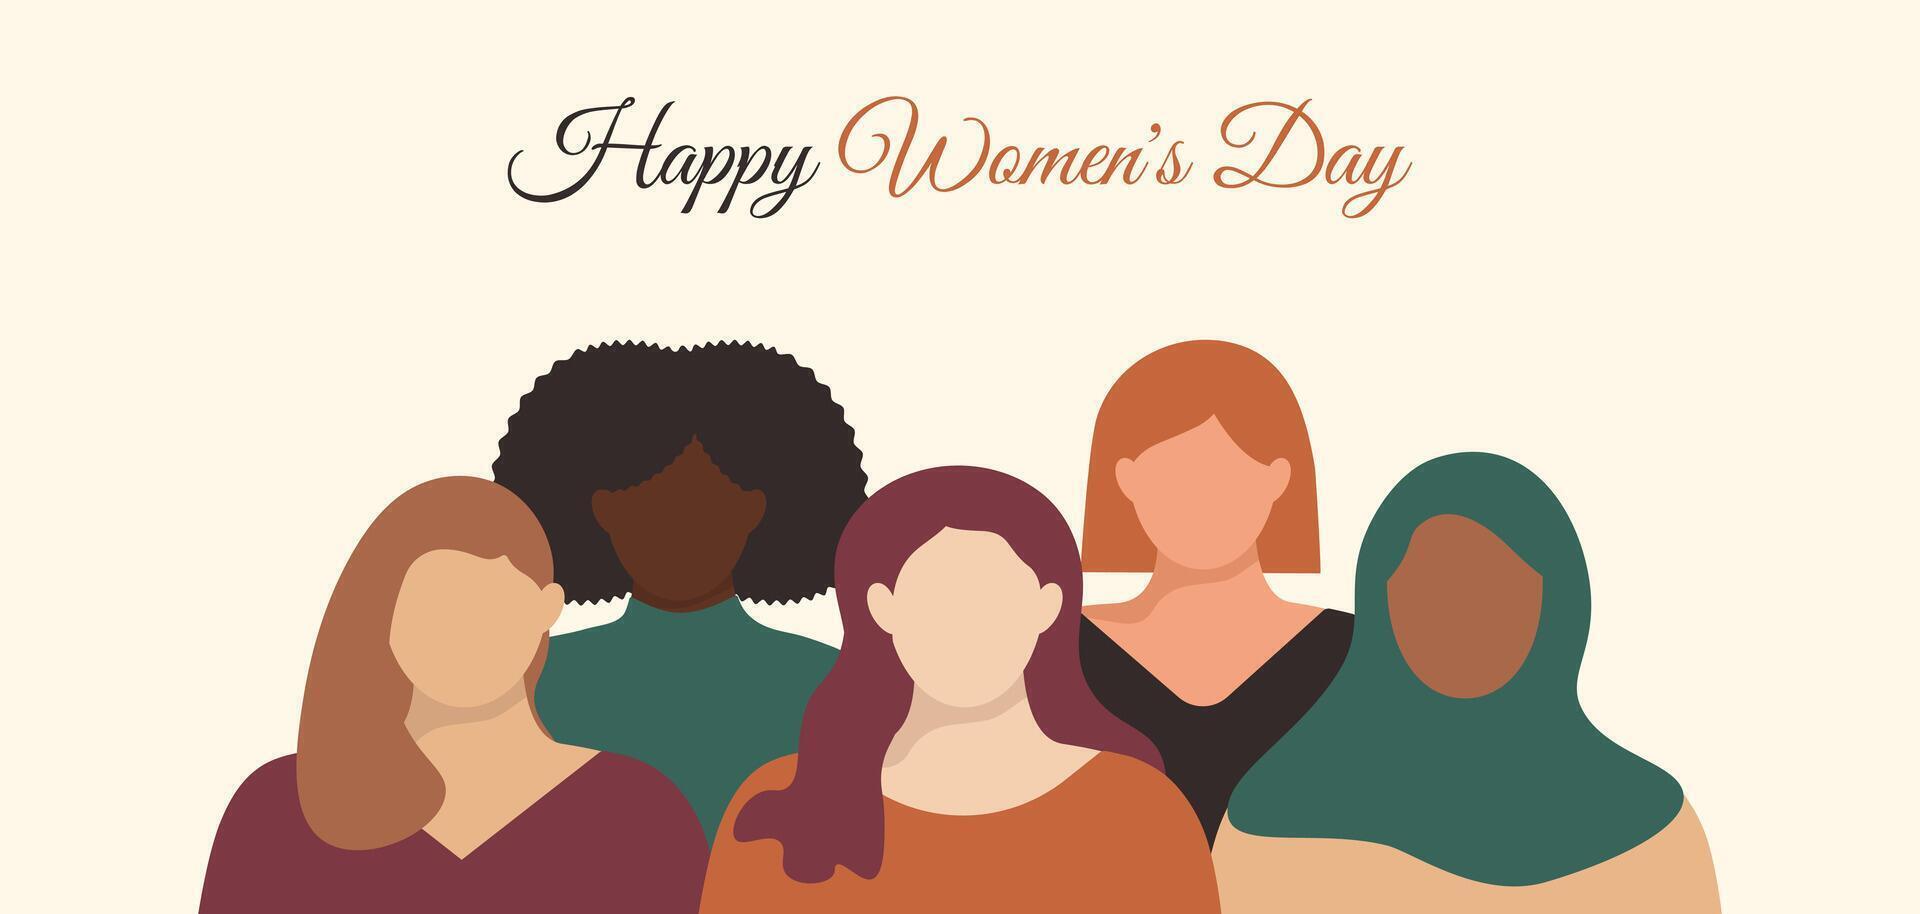 Happy Women's Day banner. Diverse Girls standing together. Sisterhood and females friendship minimalist faceless illustration. vector